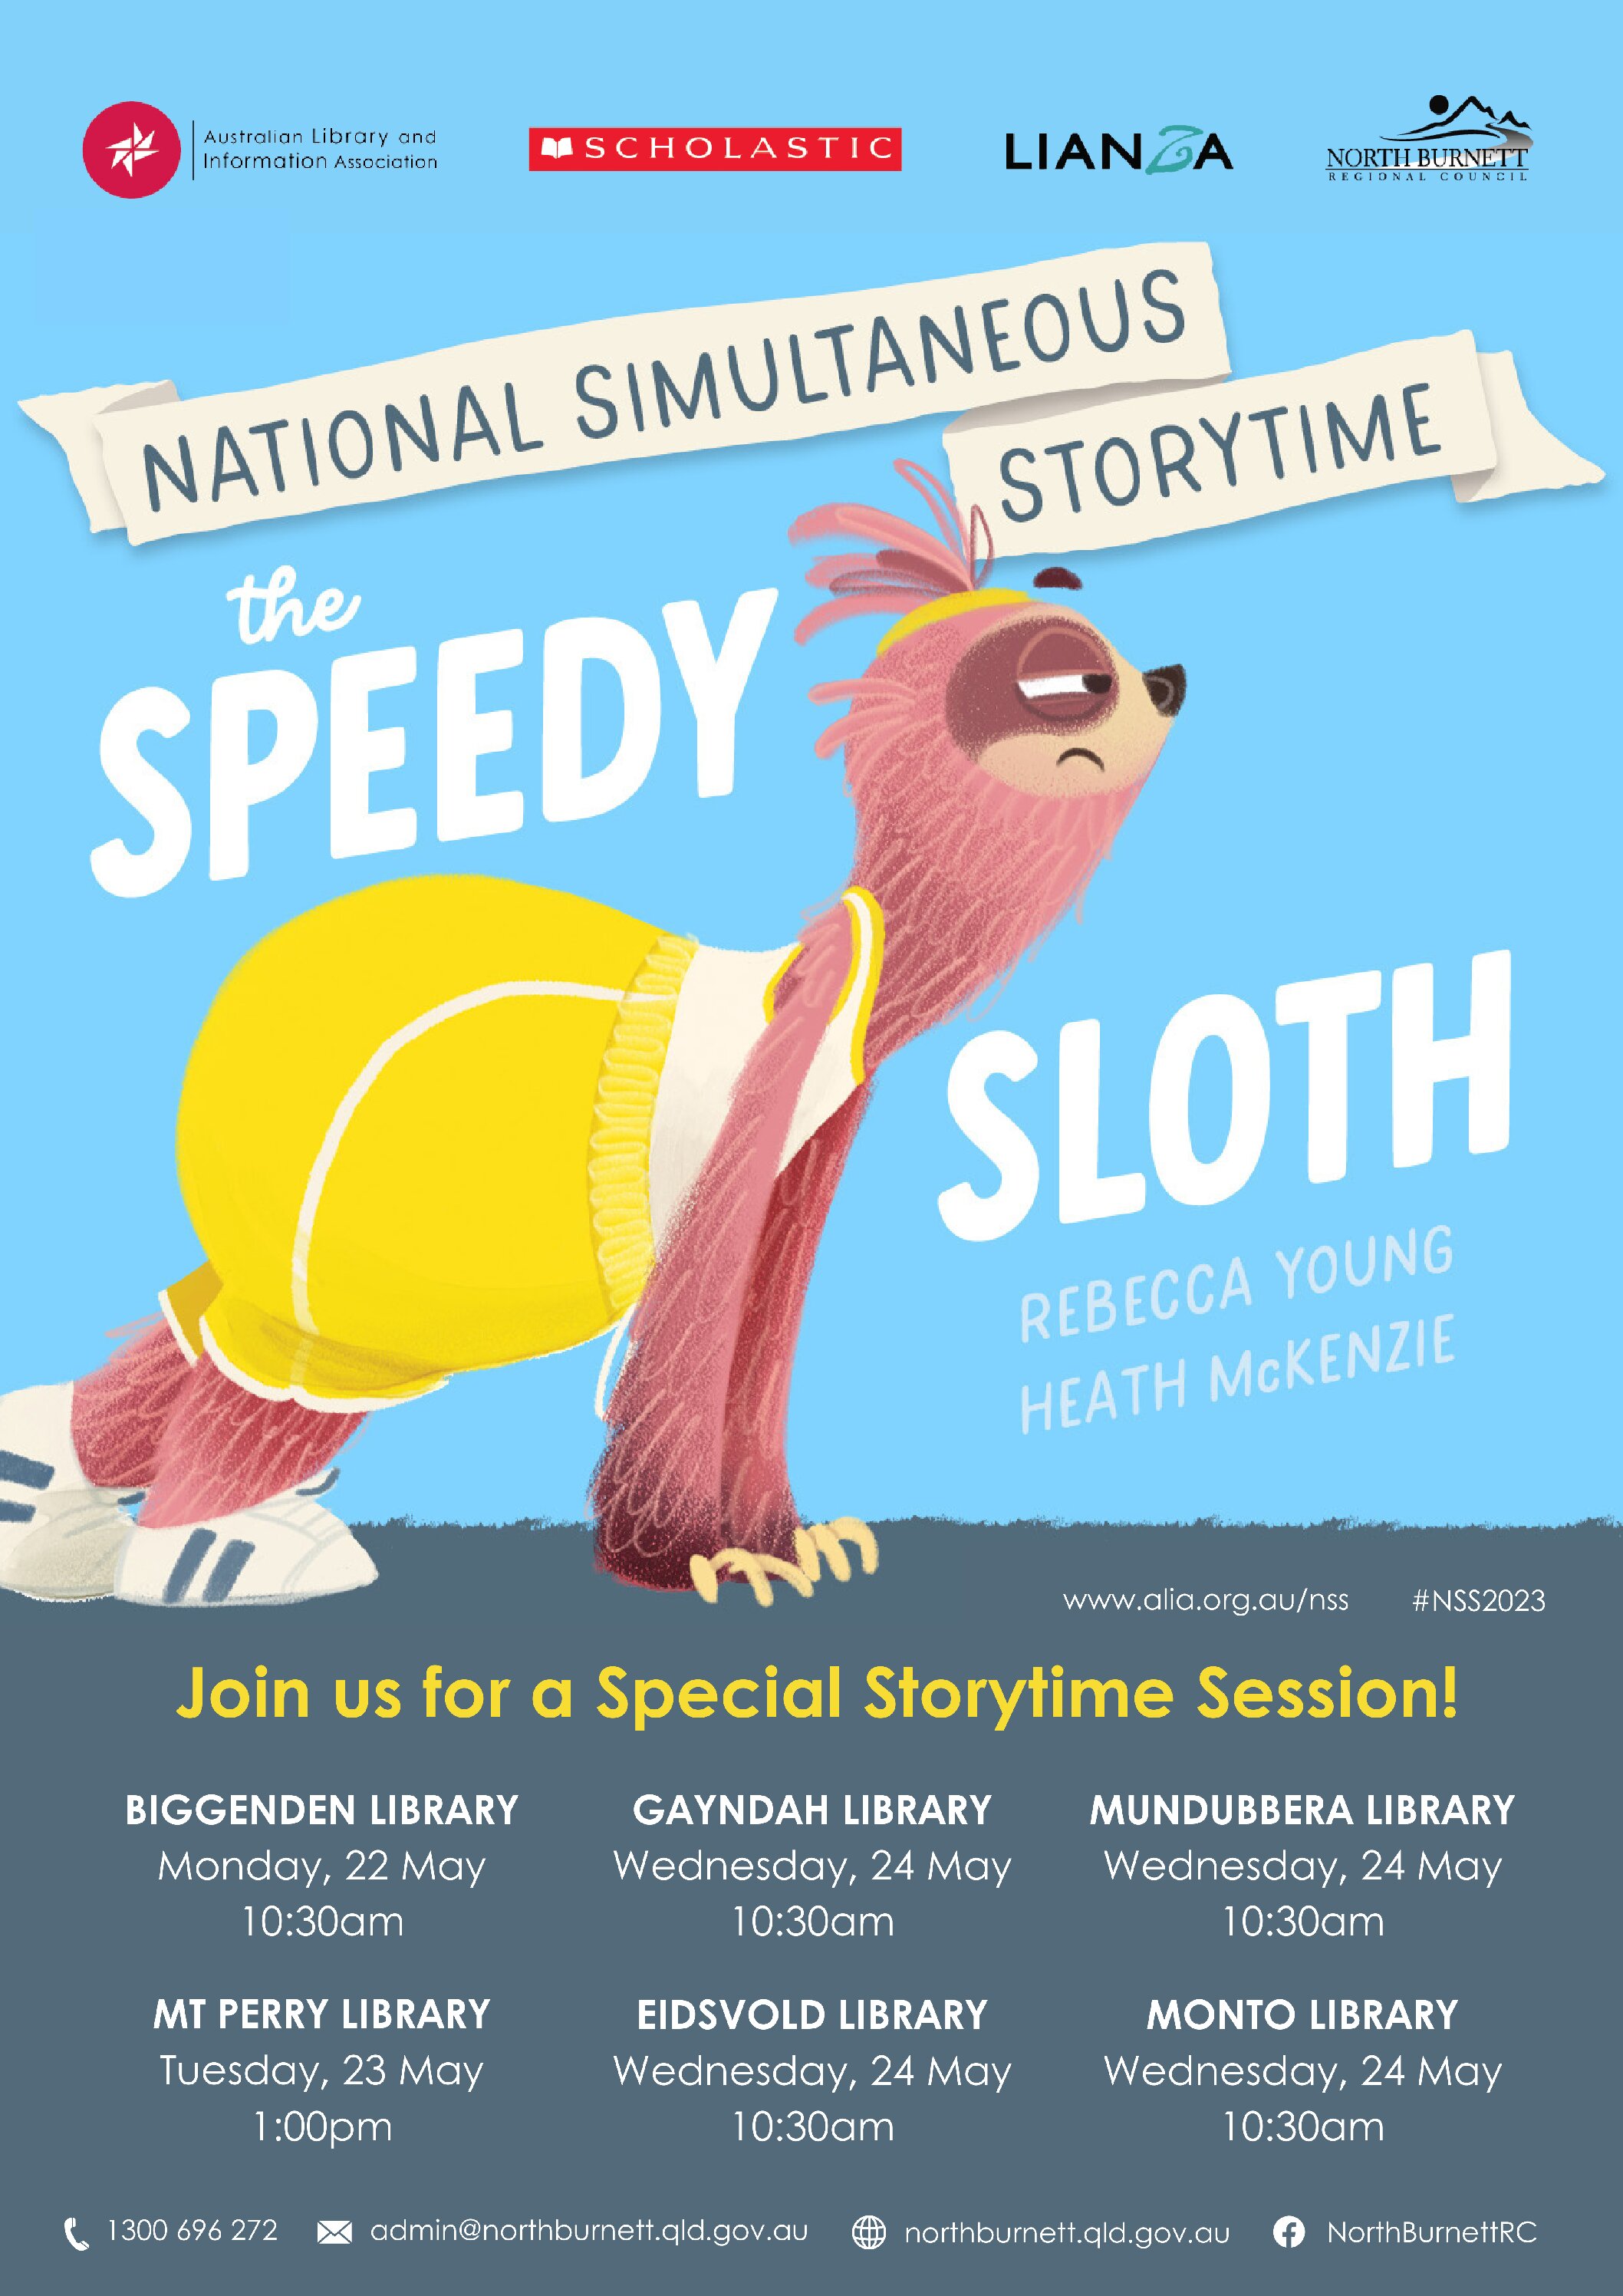 Eidsvold – National Simultaneous Storytime